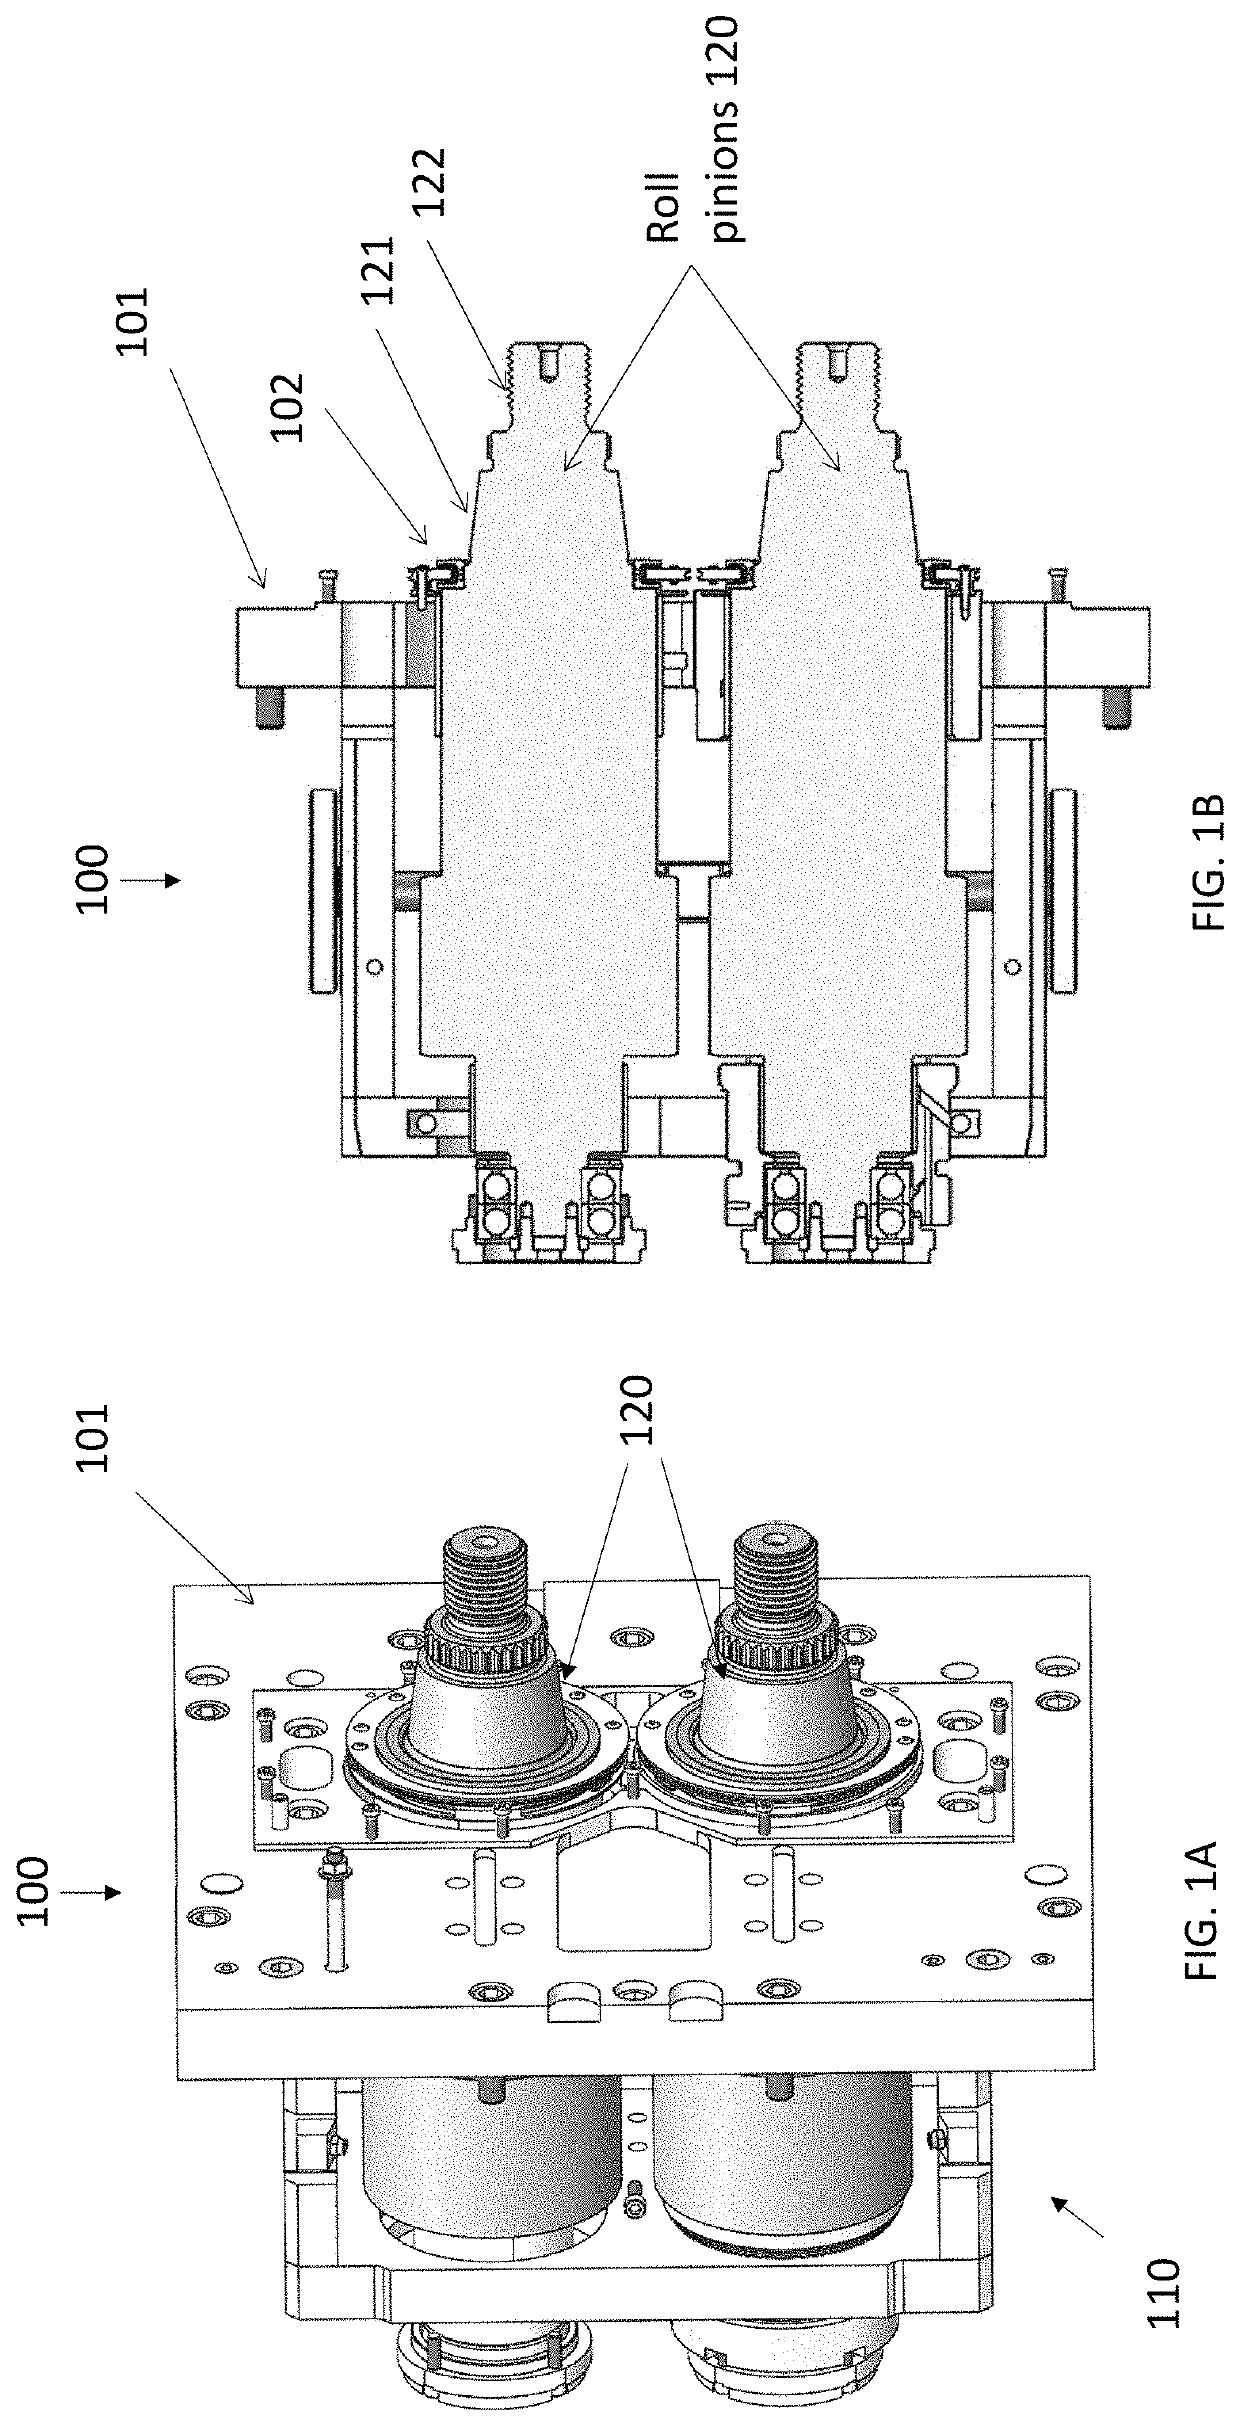 Mechanical high speed roll change system for use with robotic roll change system